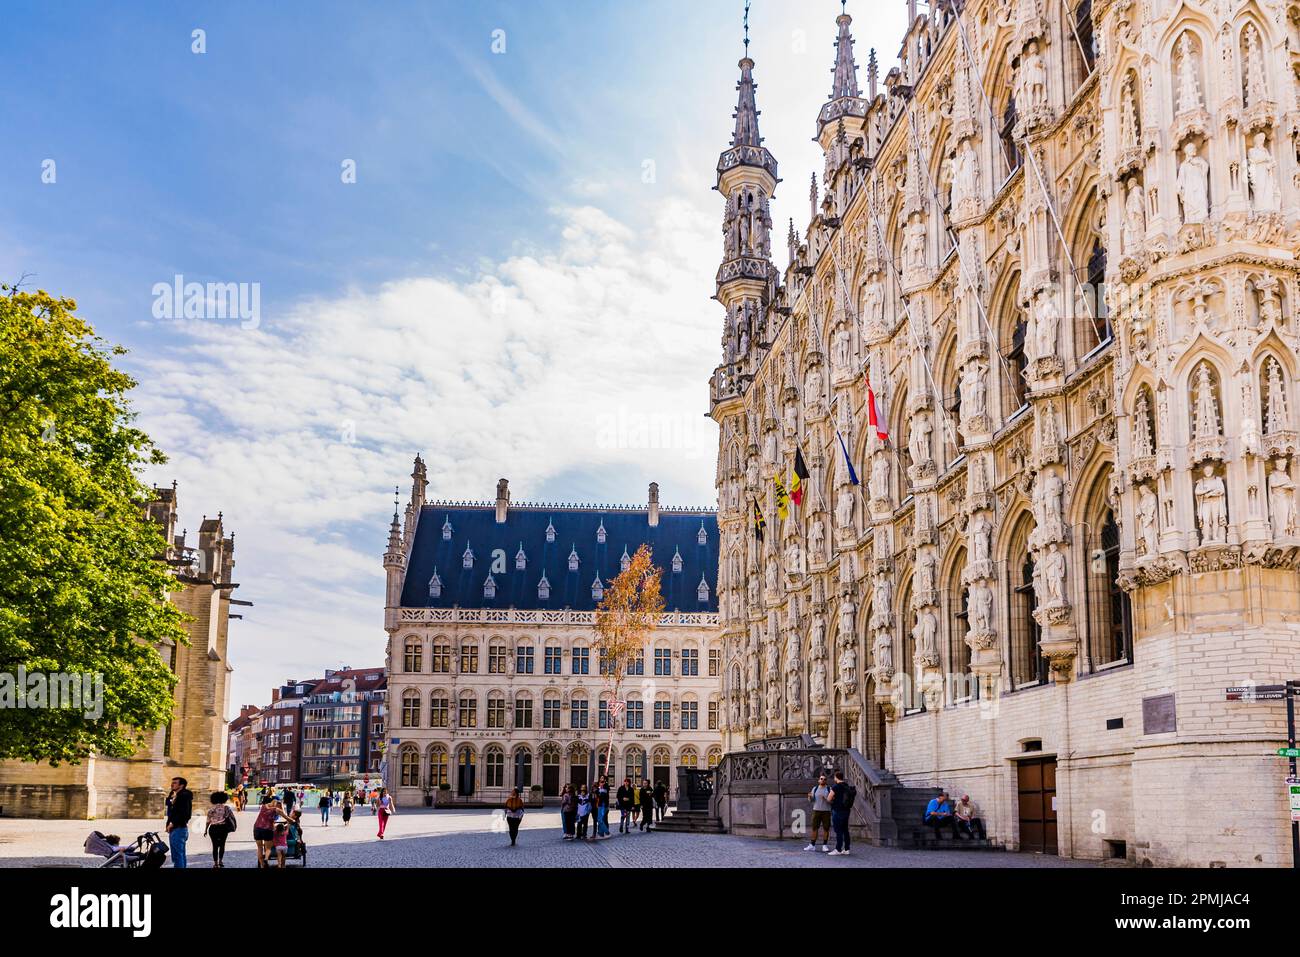 The Grote Markt is the central square of Leuven. Most of the square's buildings are built in the Gothic style, of which the Town Hall is a prime examp Stock Photo